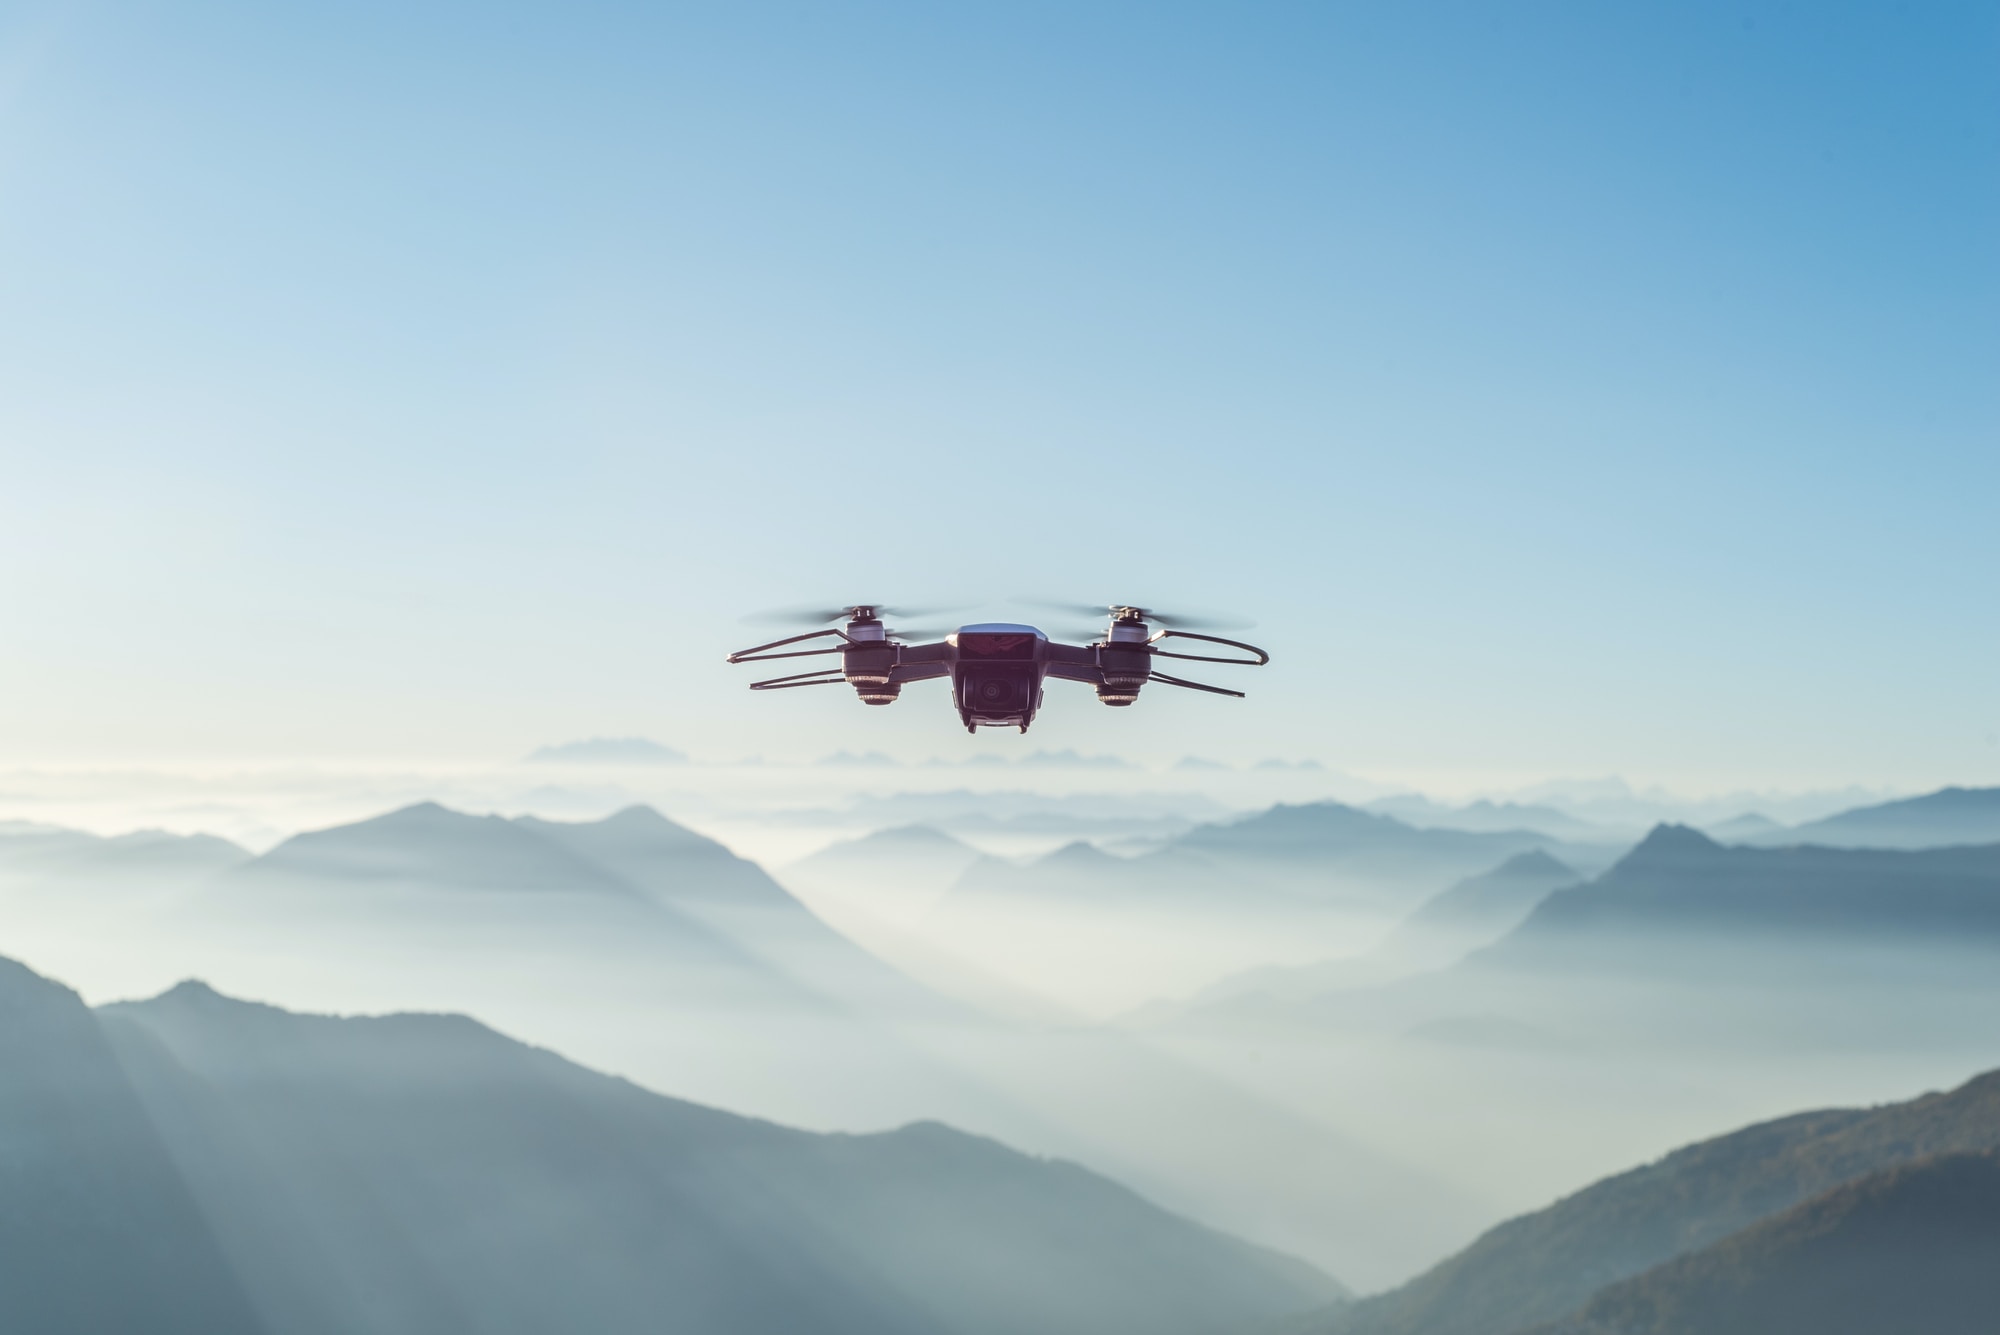 IoT drone used in the sky above mountains